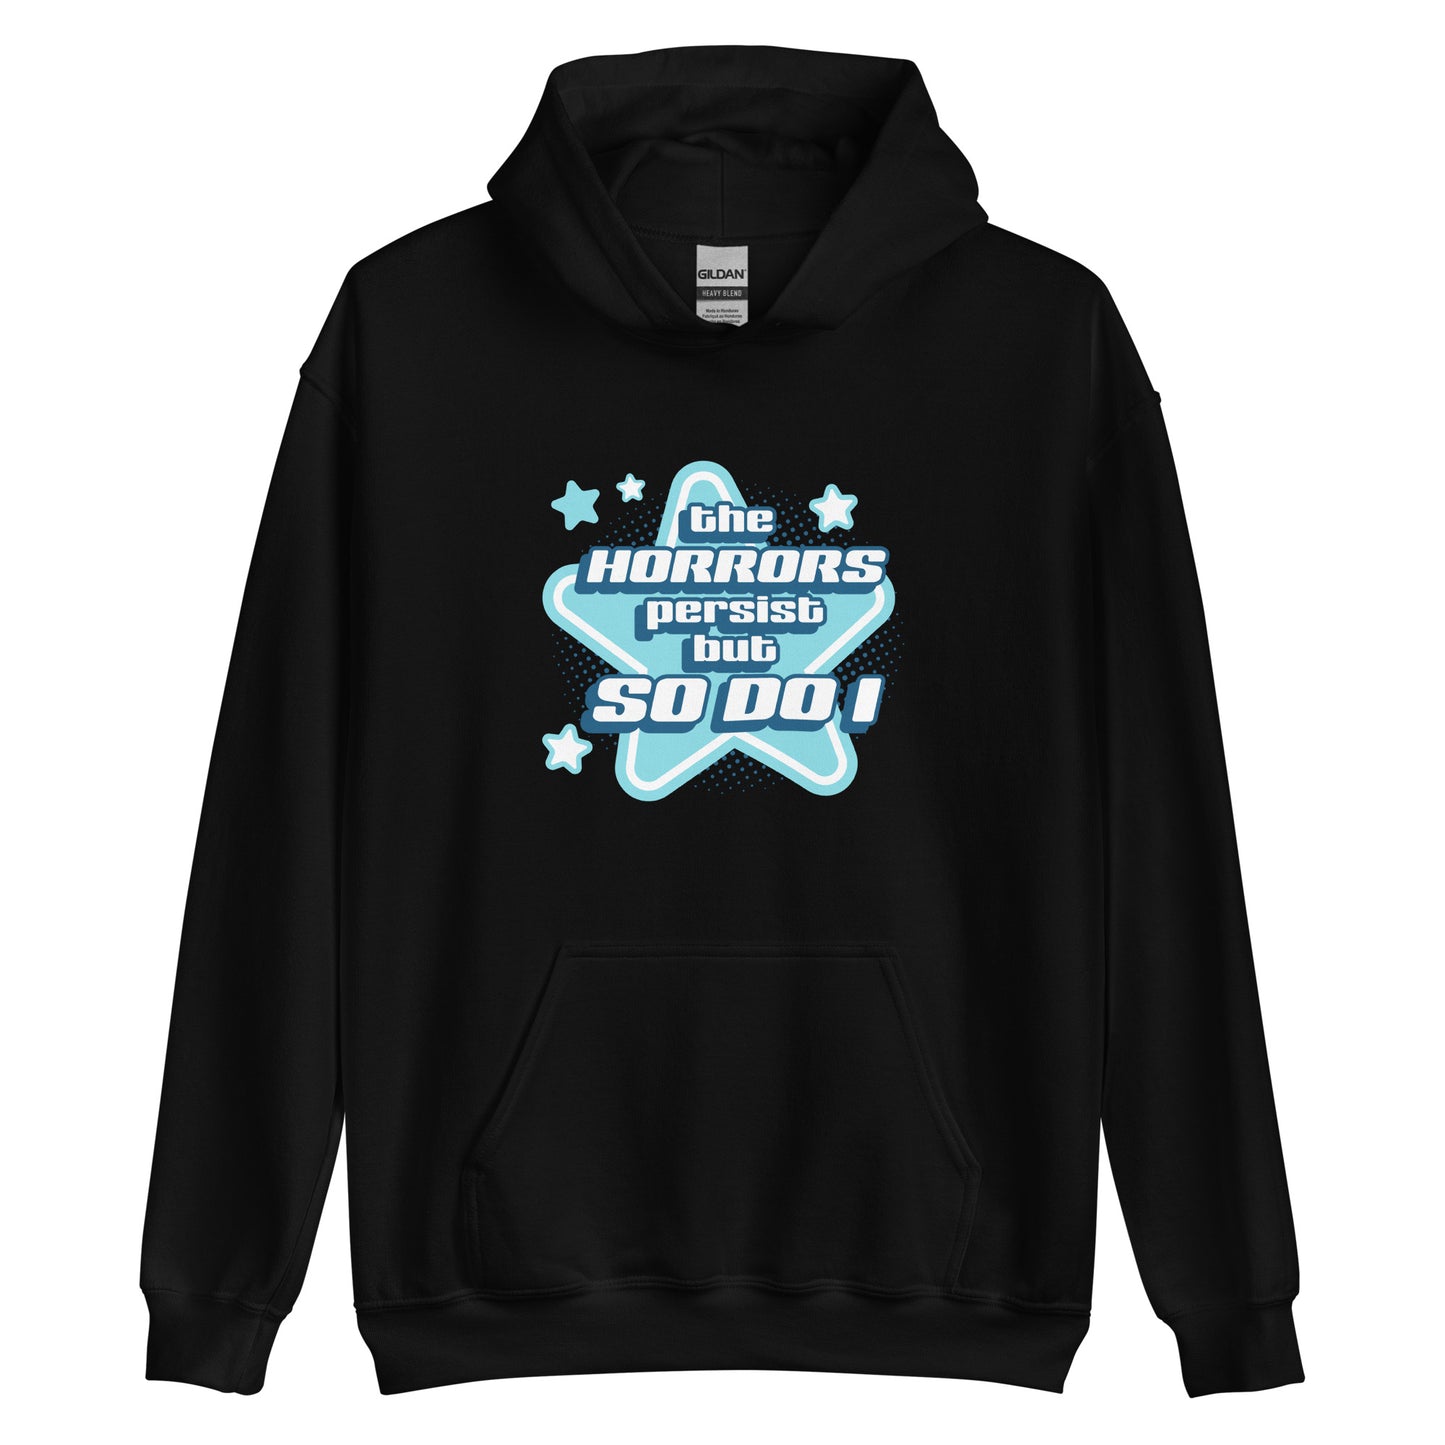 A black hooded sweatshirt featuring blue and white stars over a halftone pattern with chunky text that reads "the horrors persist but so do i".